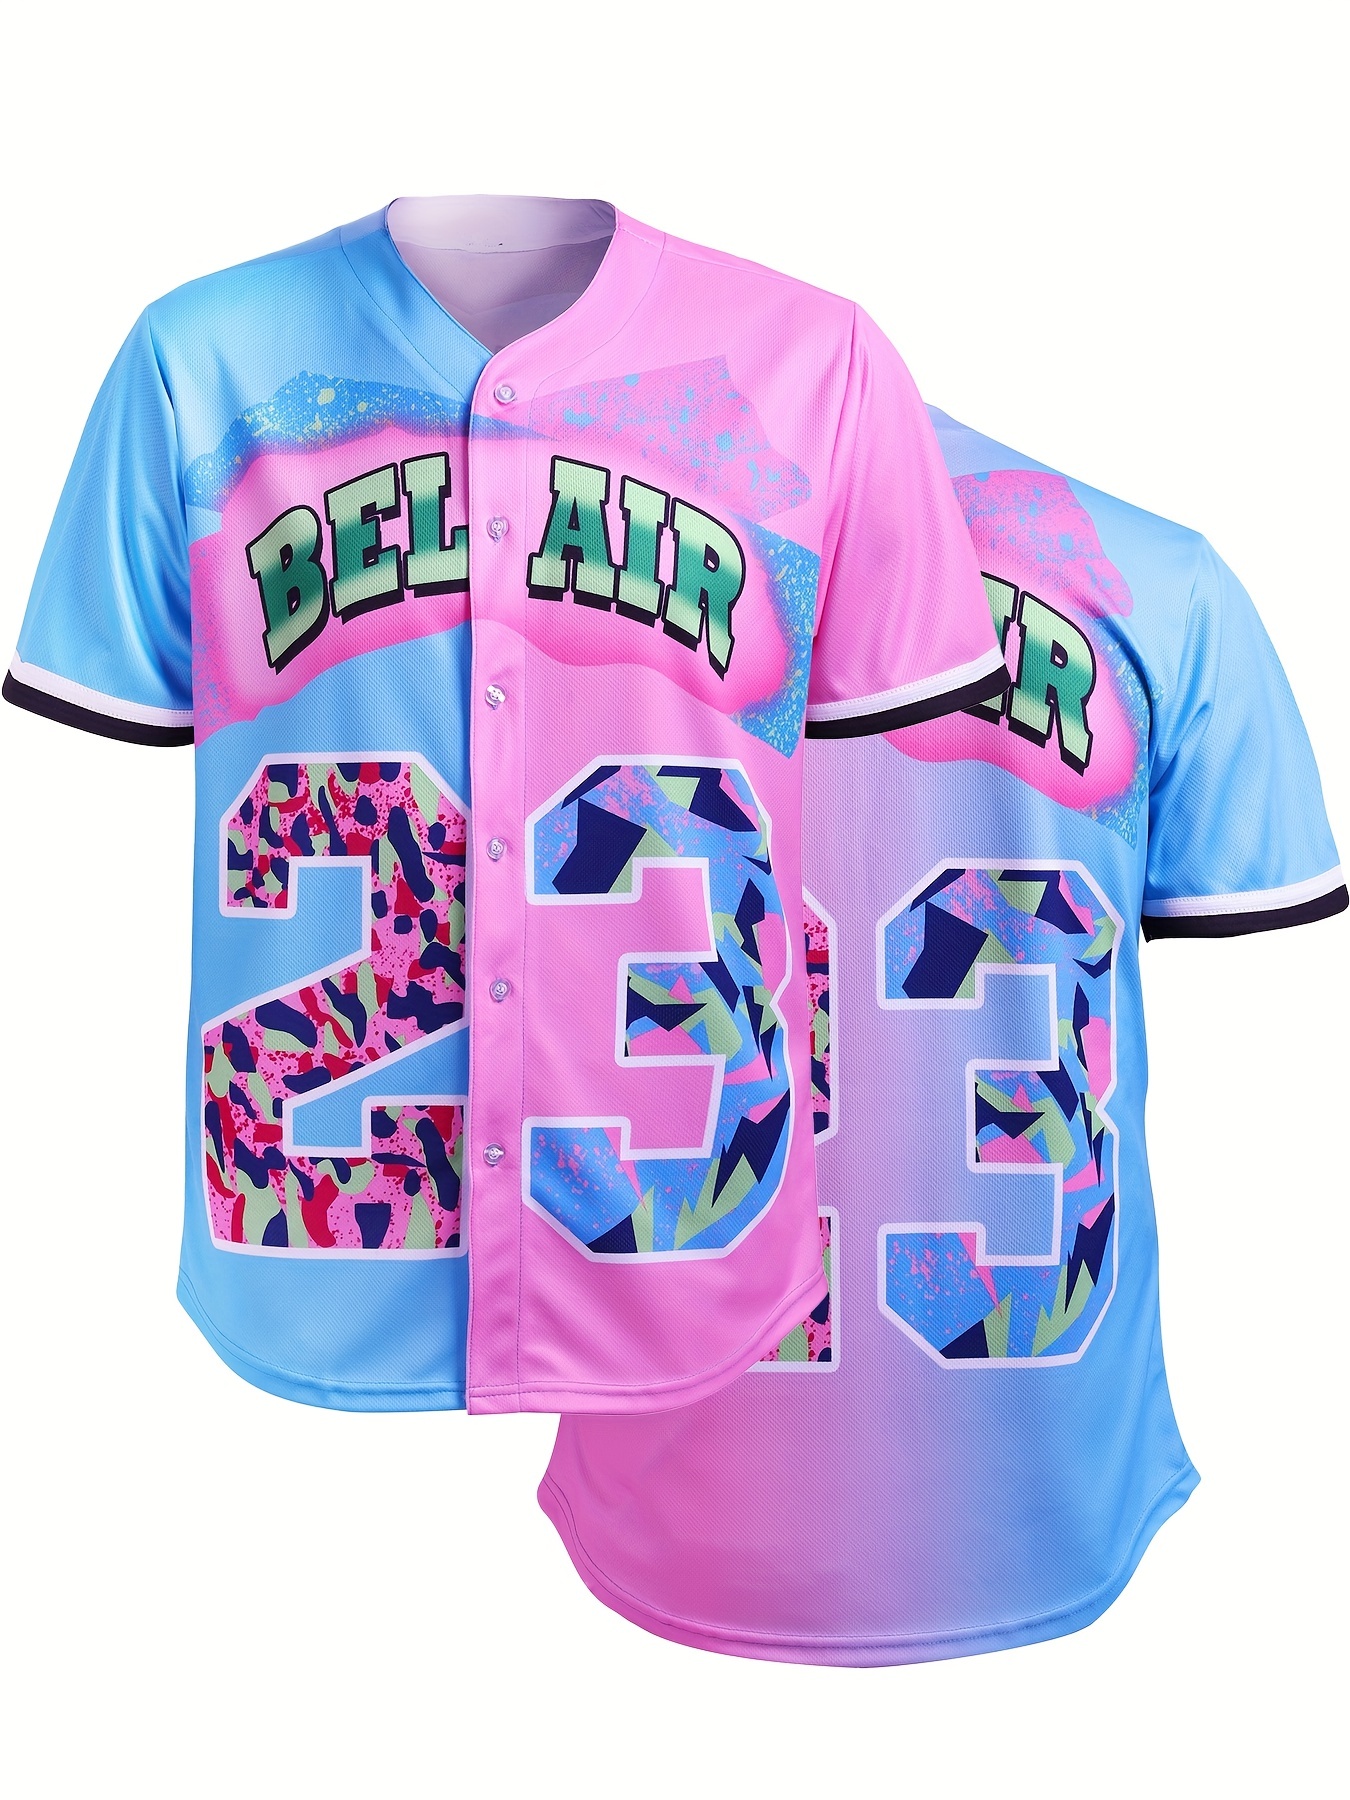 Temu Men's Bel Air #23 Baseball Jersey, 90's City Theme Party Clothing, Hip Hop Color Block Button Up Short Sleeve Shirt Suitable for Birthday Parties